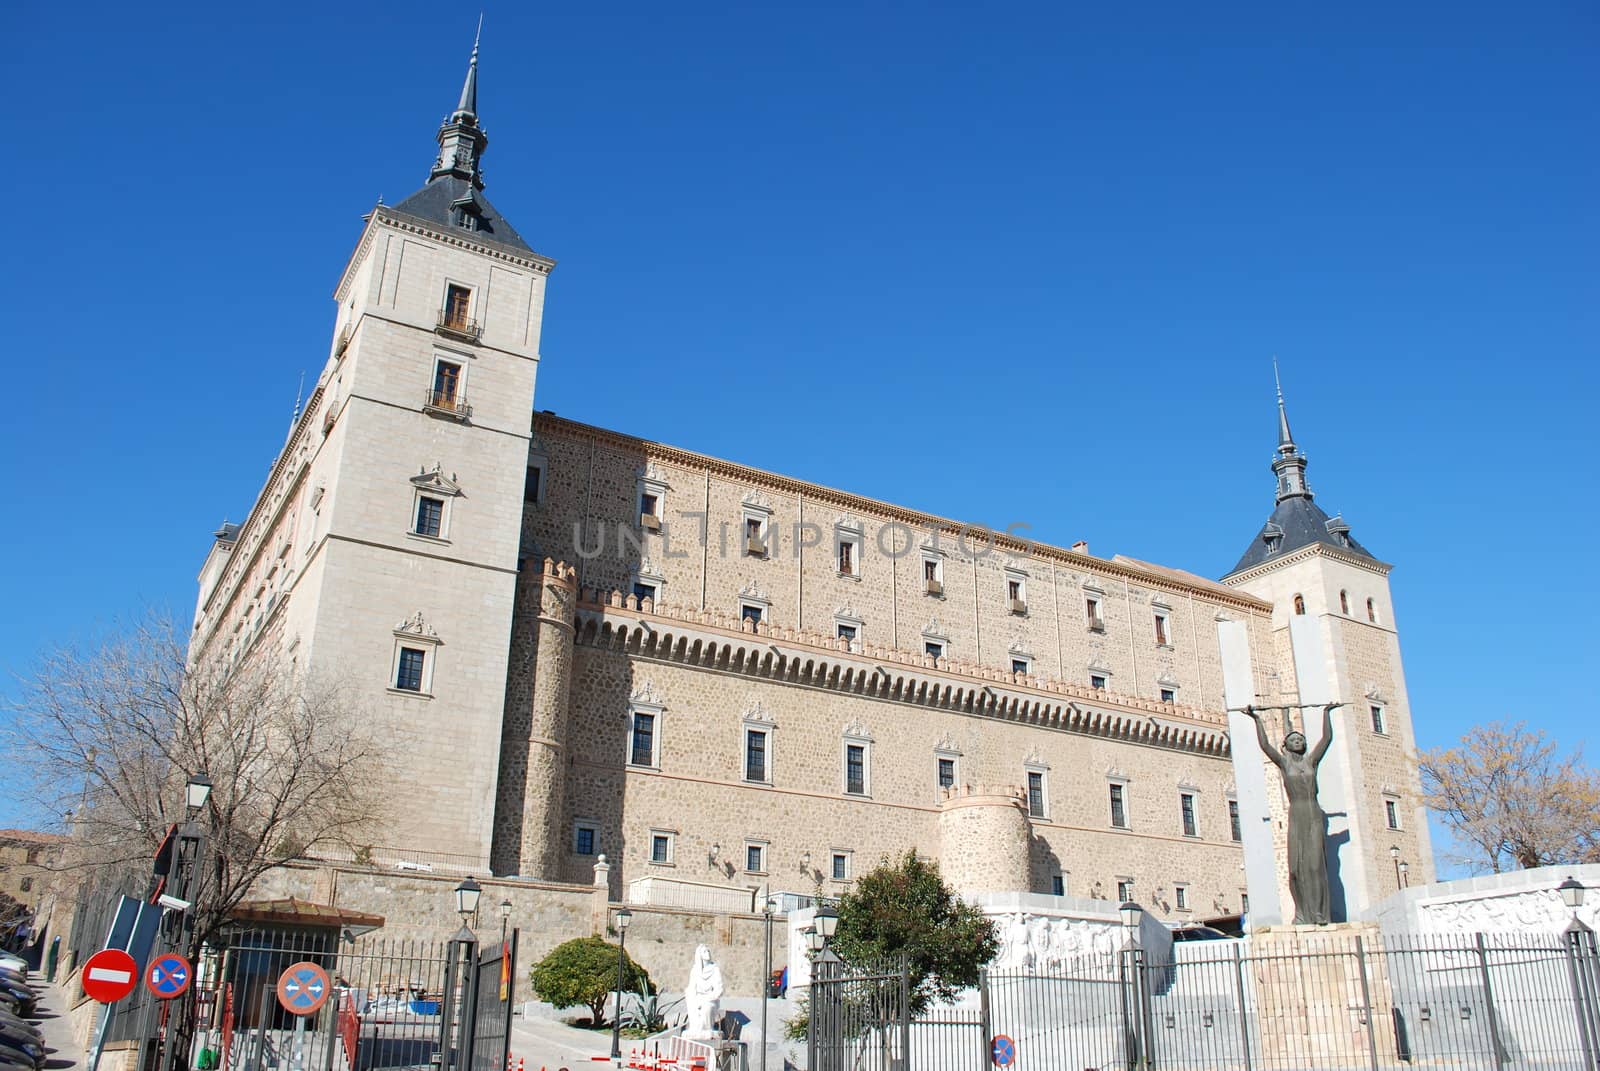 main important monument and museum in Toledo, Spain